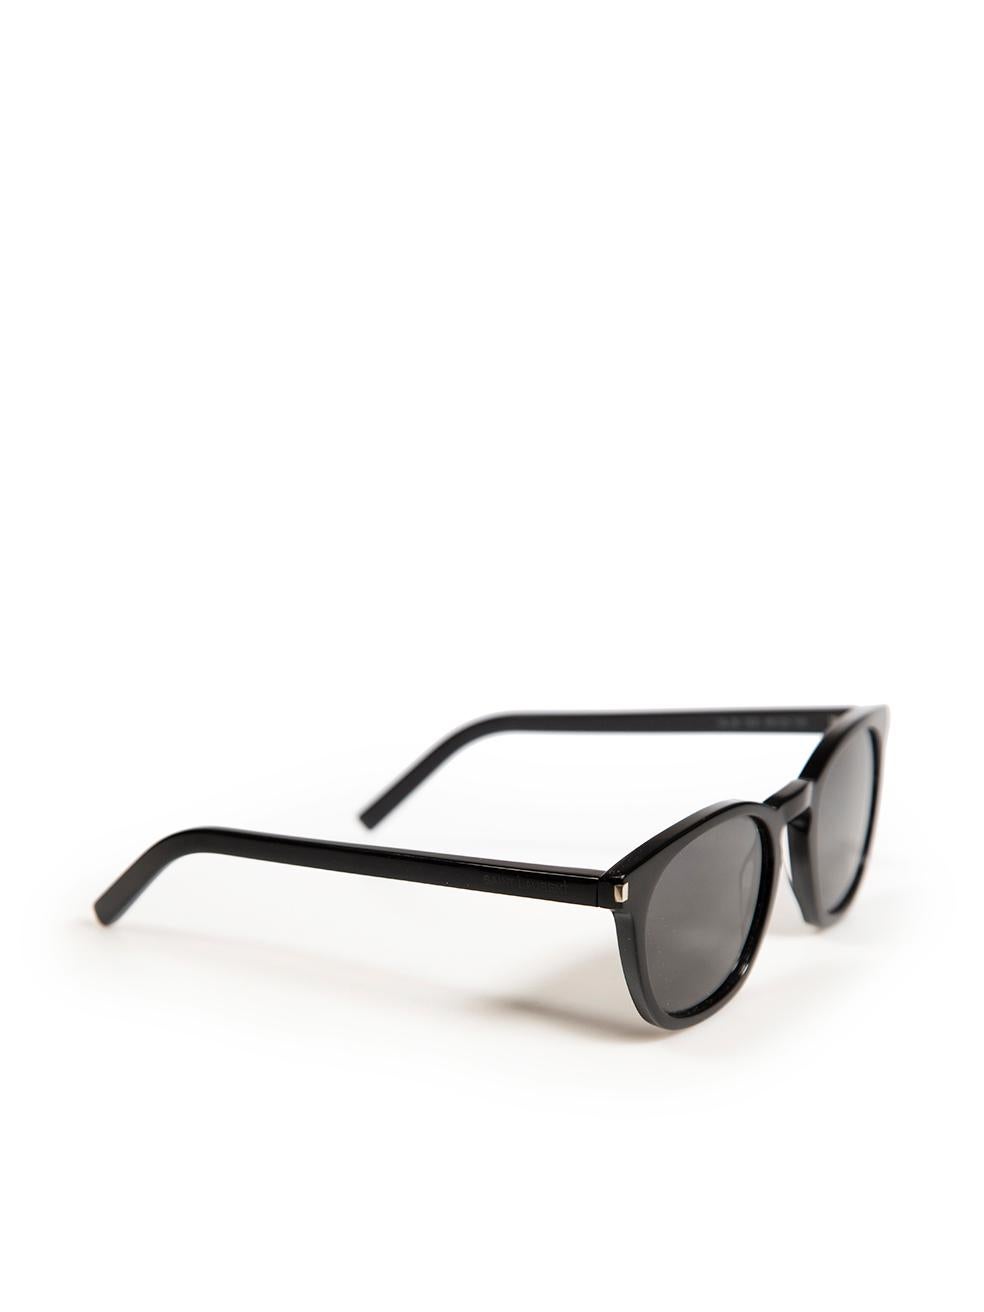 CONDITION is Very good. Hardly any visible wear to sunglasses is evident on this used Saint Laurent designer resale item.
 
 Details
 SL28
 Black
 Plastic
 Sunglasses
 Round frame
 Black tinted lens
 
 
 Made in Italy
 
 Composition
 EXTERIOR: